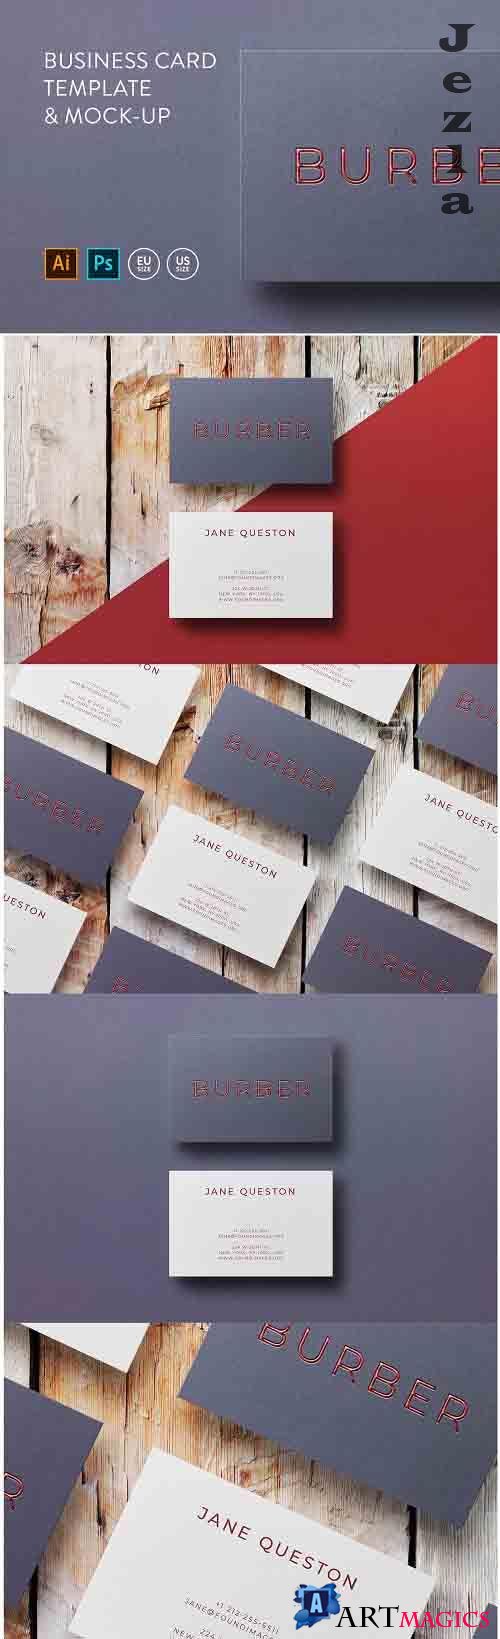 Business card Template & Mock-up #5 - 63944